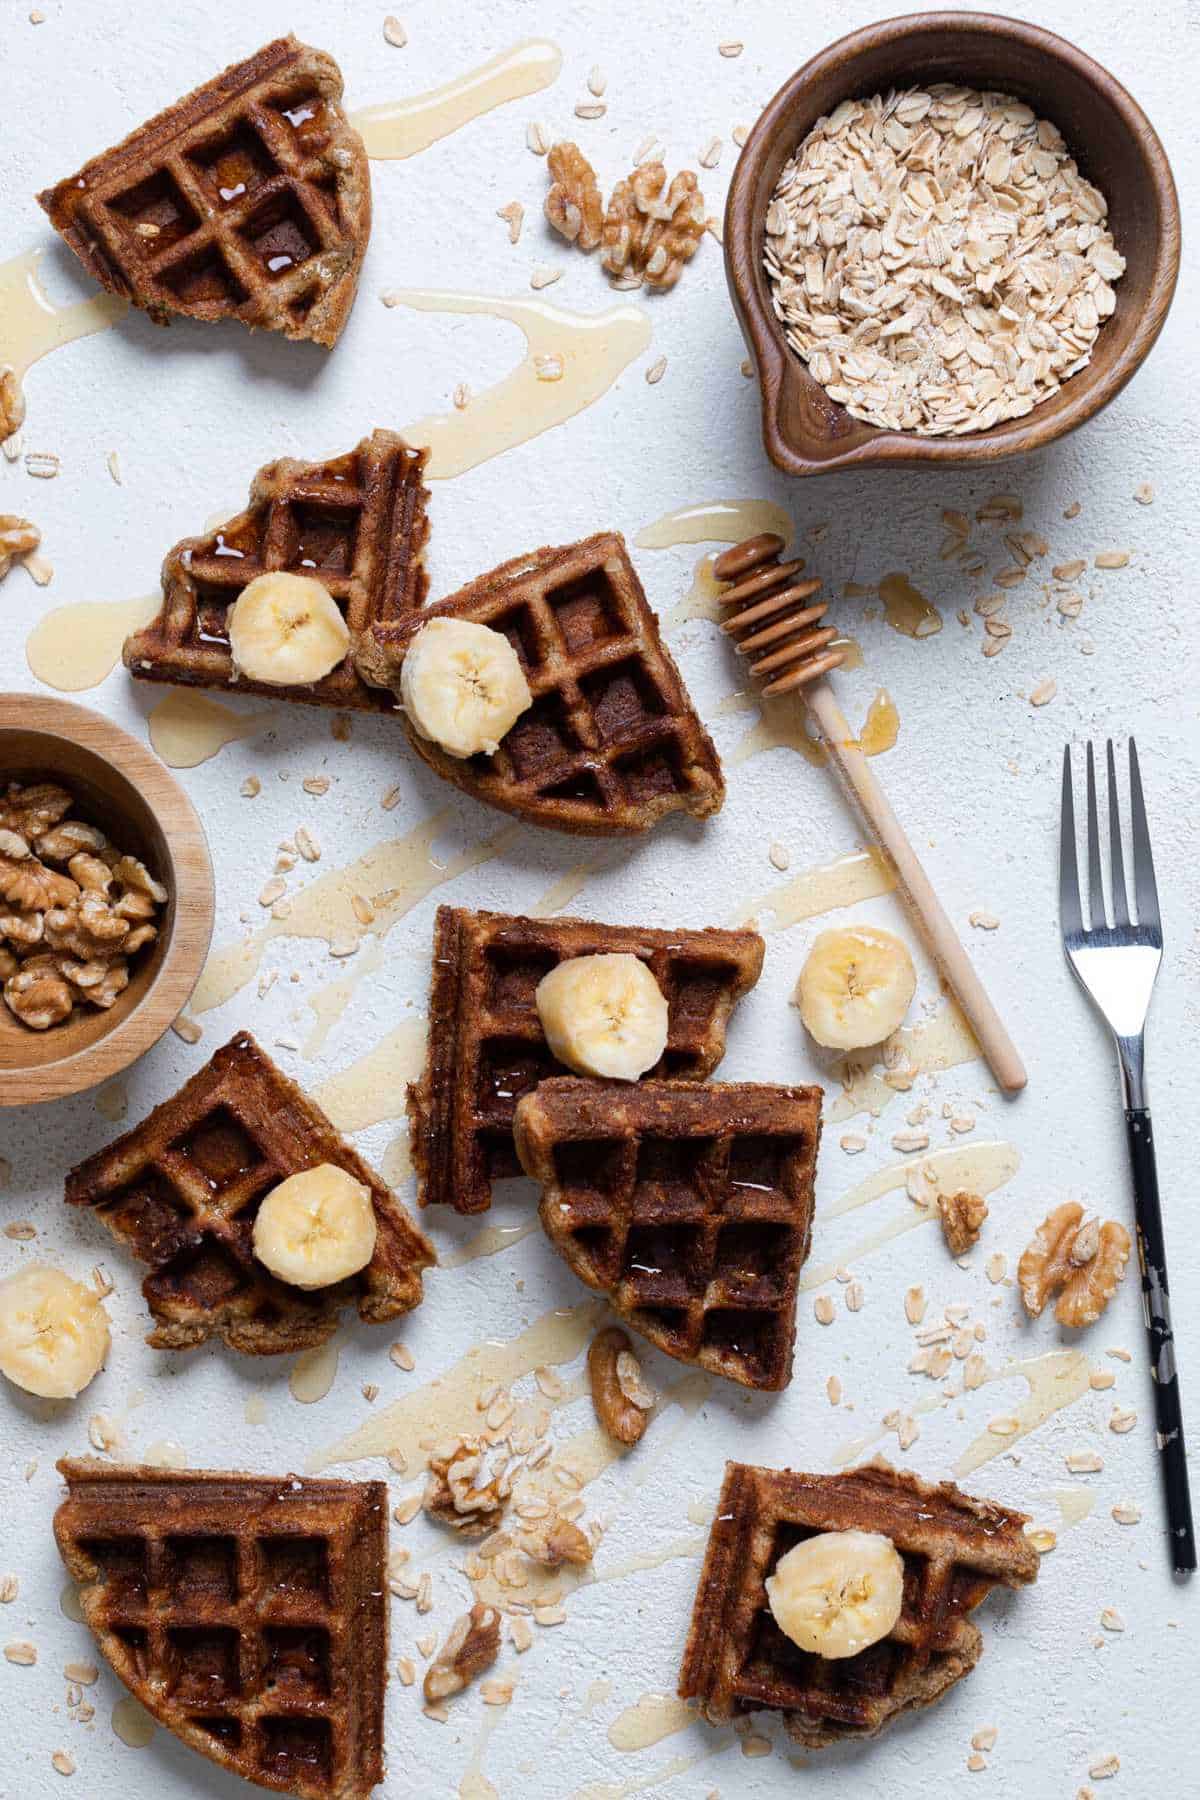 Pieces of Flourless Vegan Banana Oats Waffles on a countertop with honey, bananas, nuts, oats, and utensils.